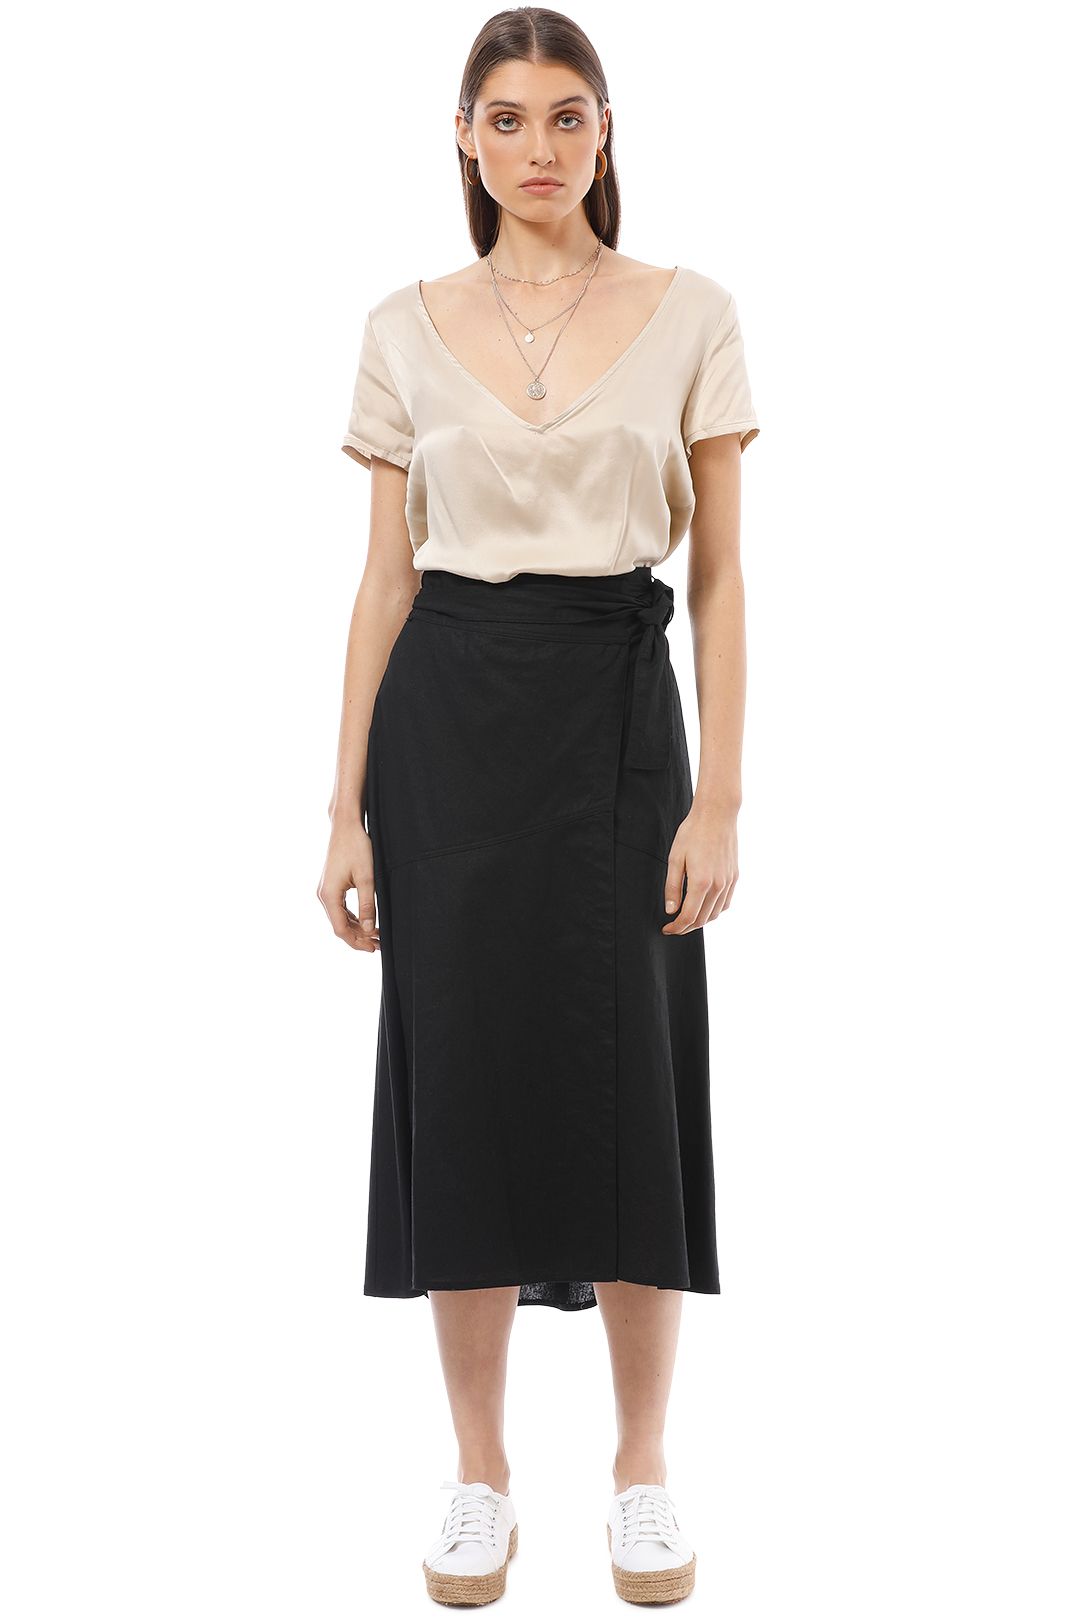 AKIN by Ginger and Smart - Grace Wrap Skirt - Black - Front